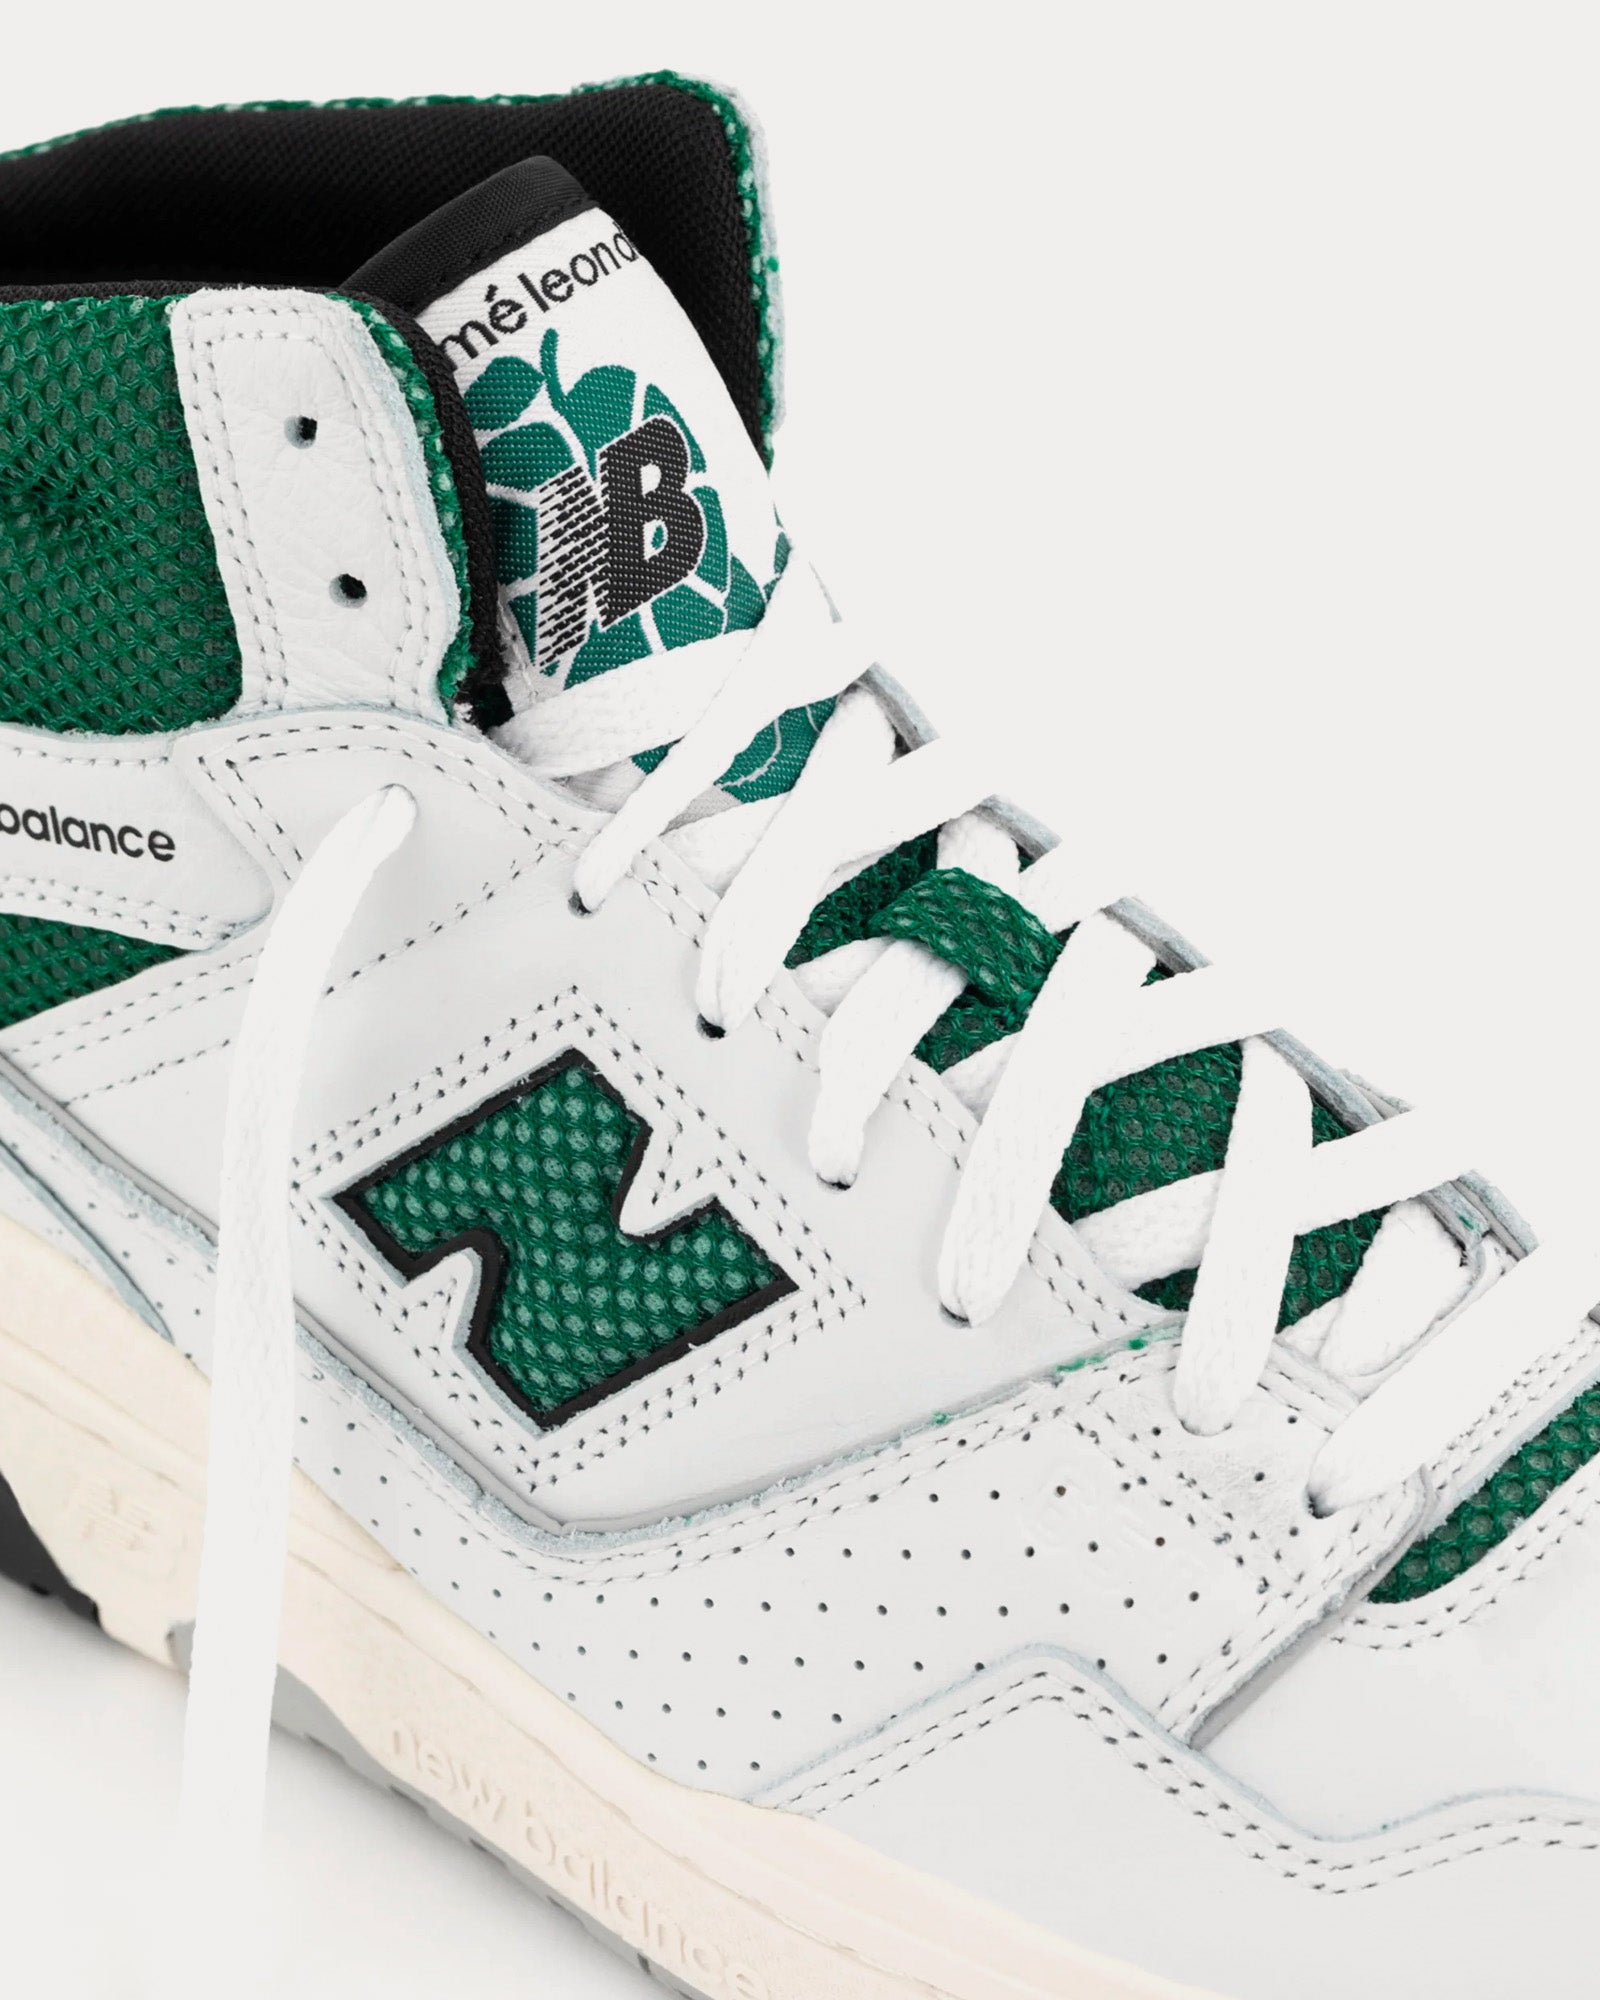 New Balance x Aime Leon Dore - 650r Leather White / Green High Top Sneakers